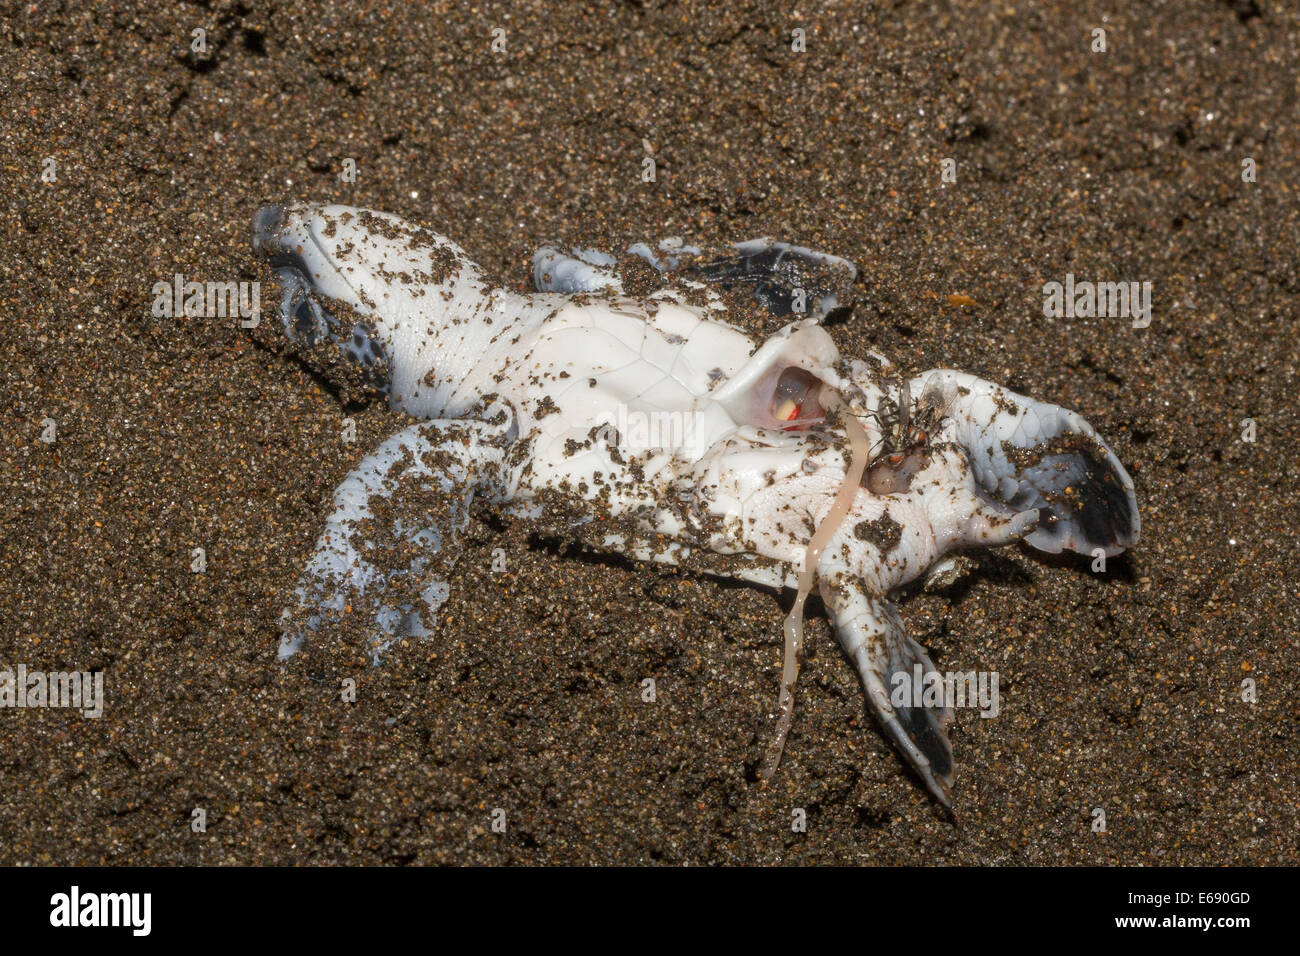 A dead green sea turtle hatchling (Chelonia mydas).  Photographed in Costa Rica. Stock Photo